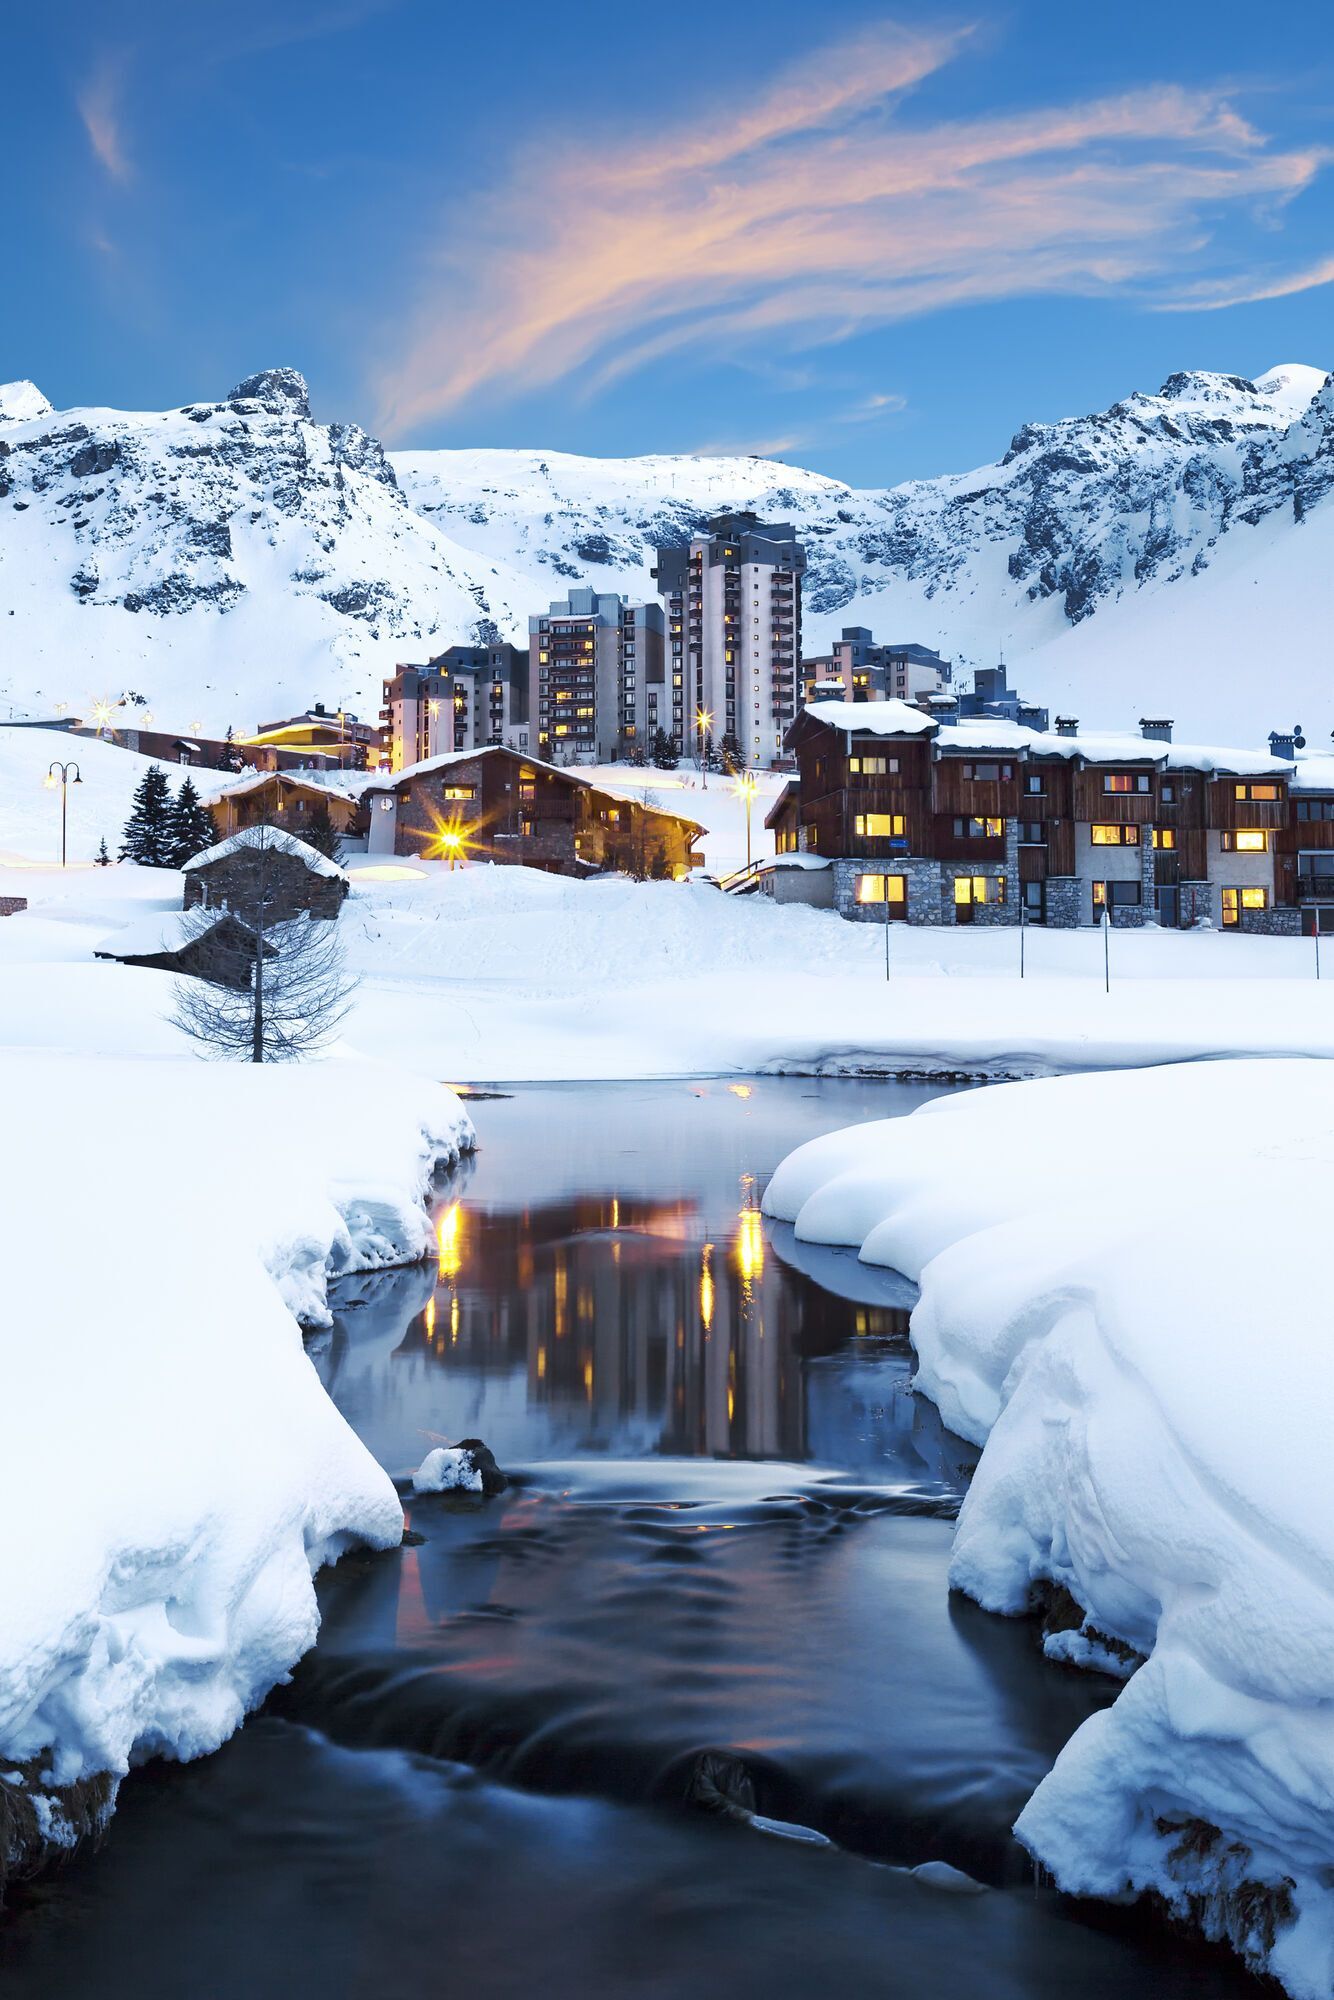 Top 12 mountain resorts in the USA: experience the magic of stunning landscapes and the eternal trend of après-ski